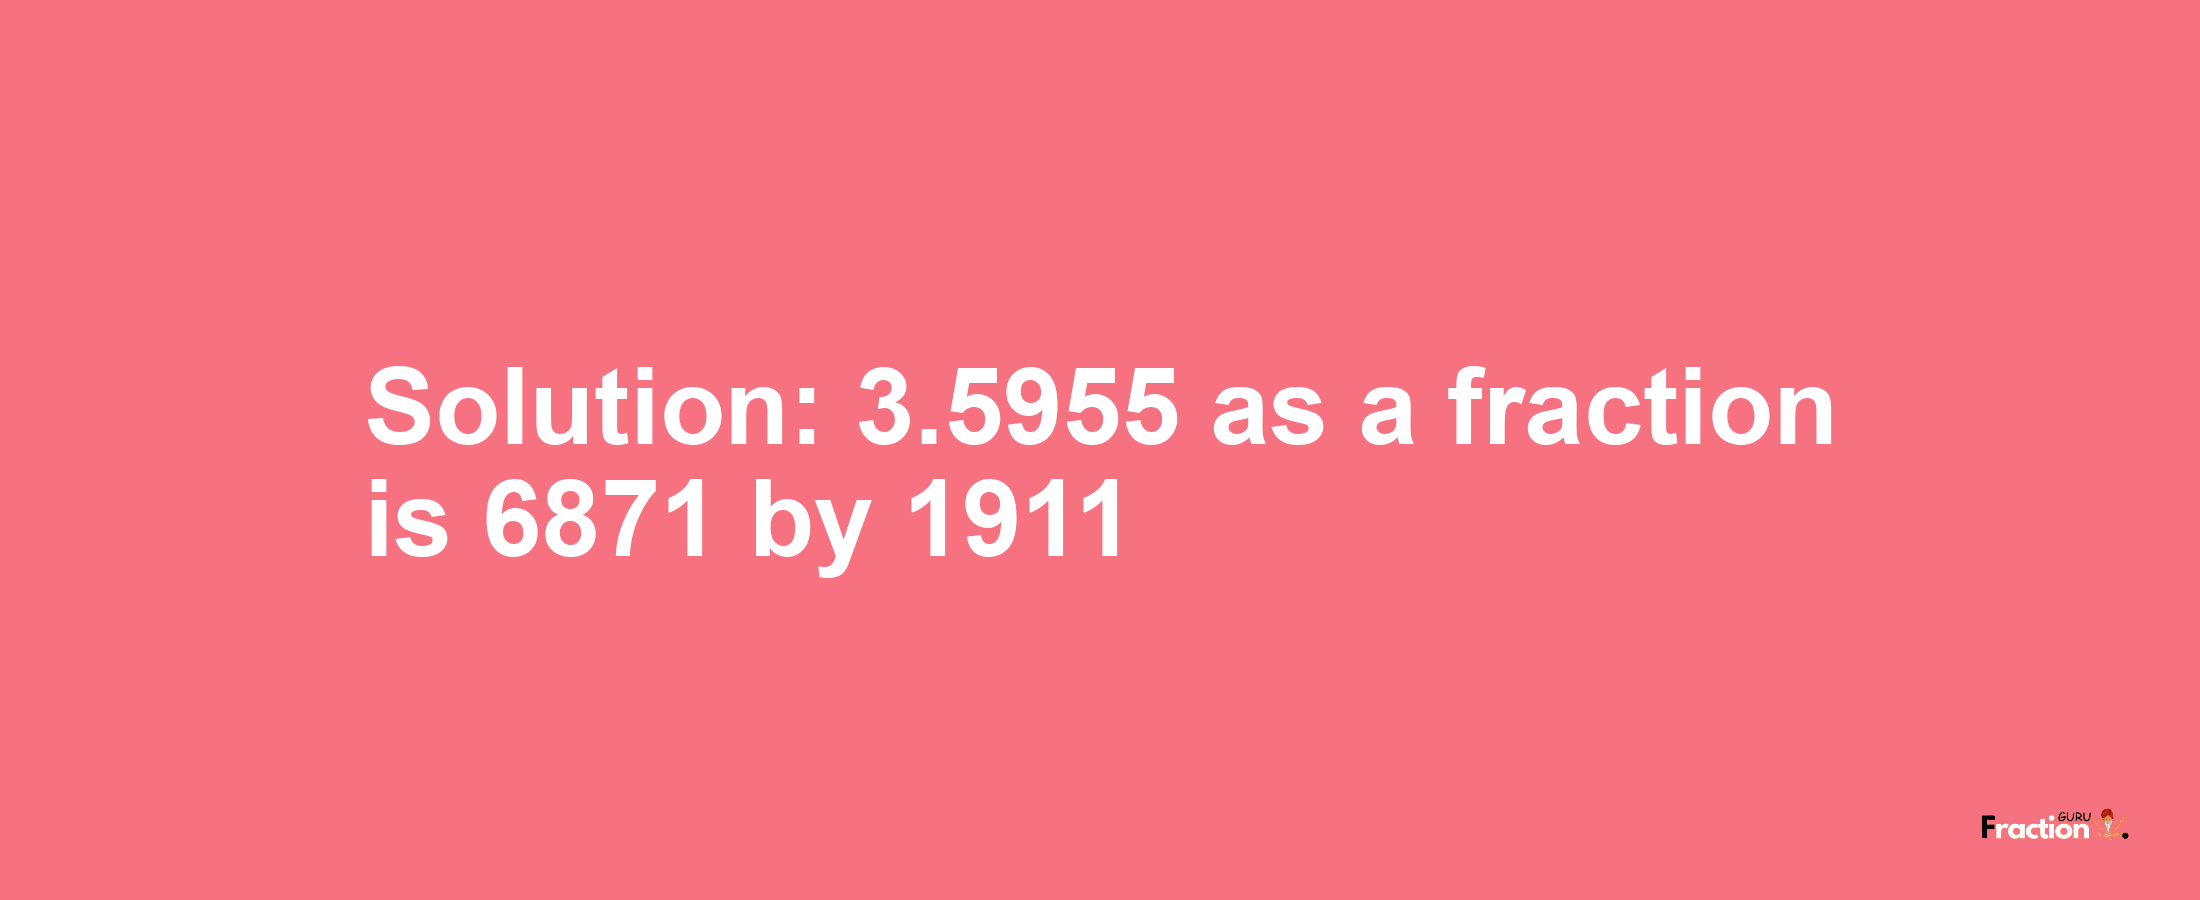 Solution:3.5955 as a fraction is 6871/1911